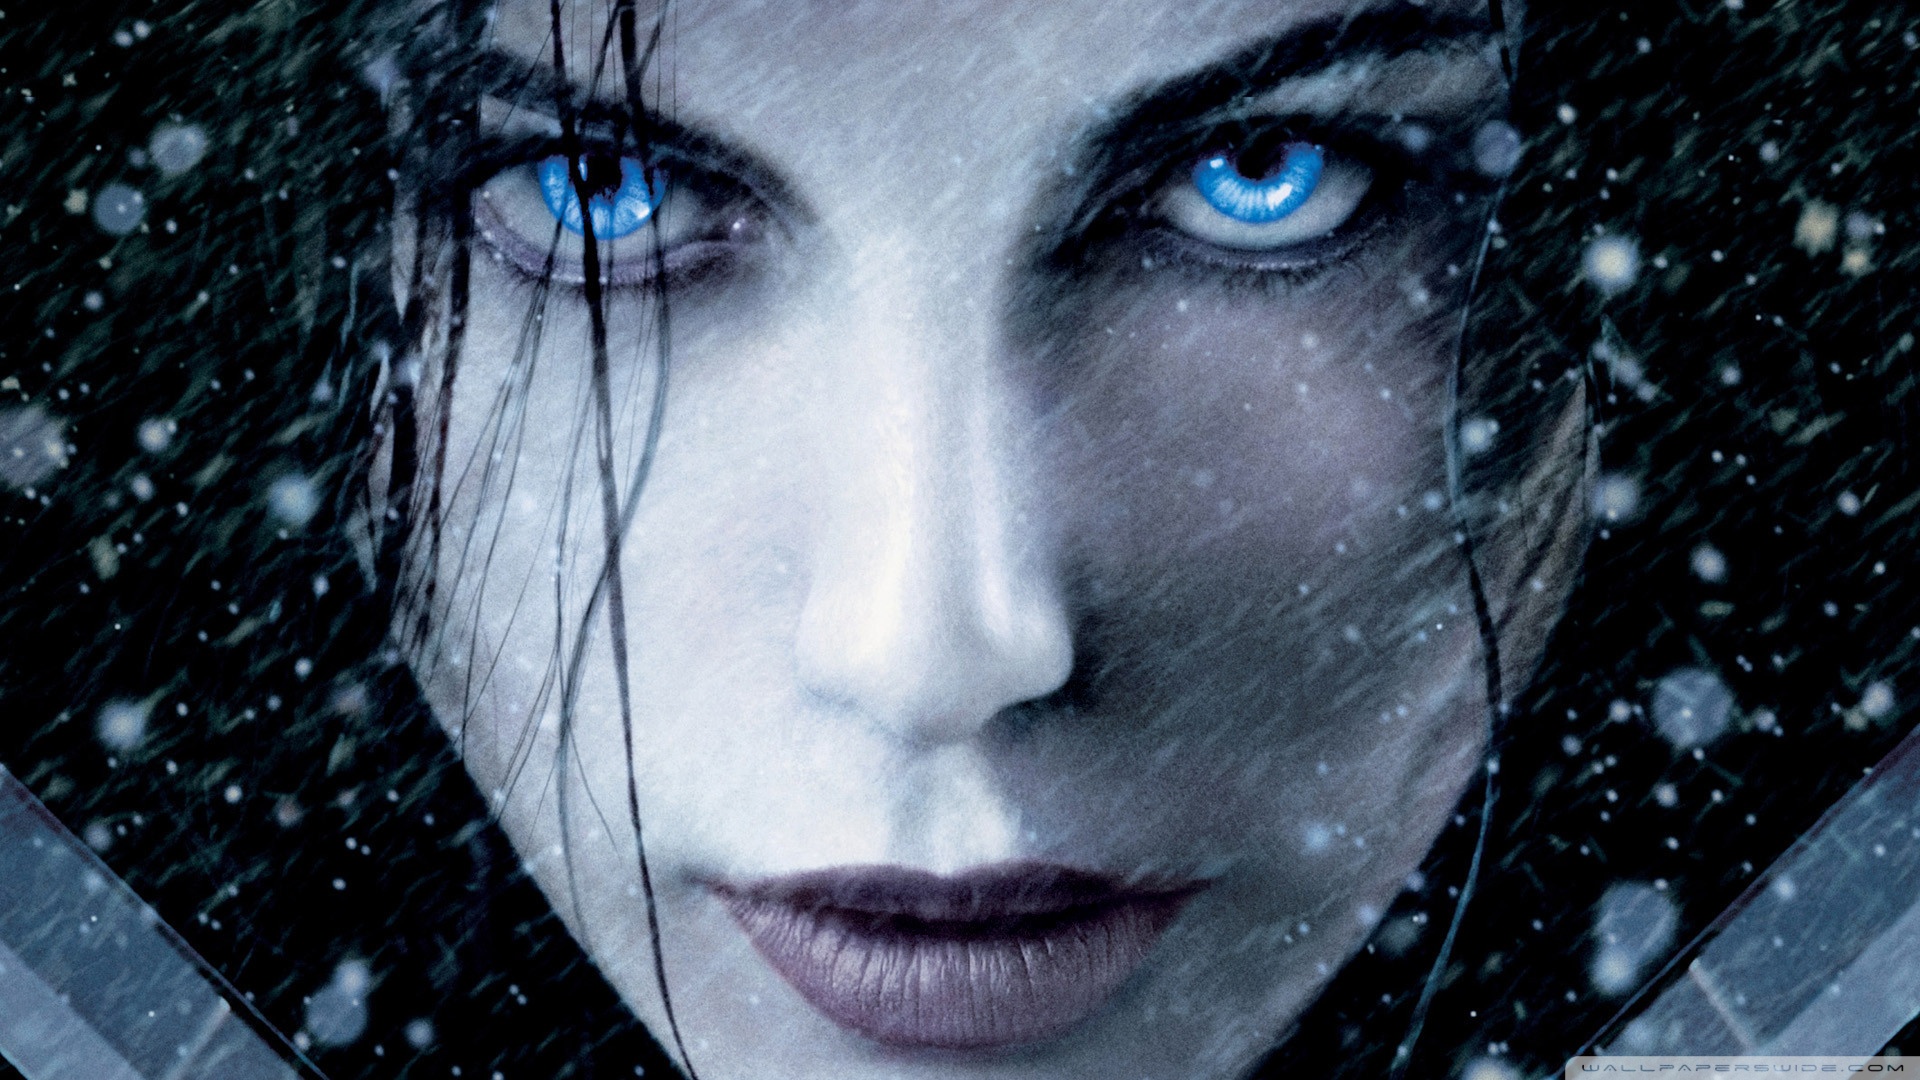 Underworld Image HD Wallpaper And Background Photos